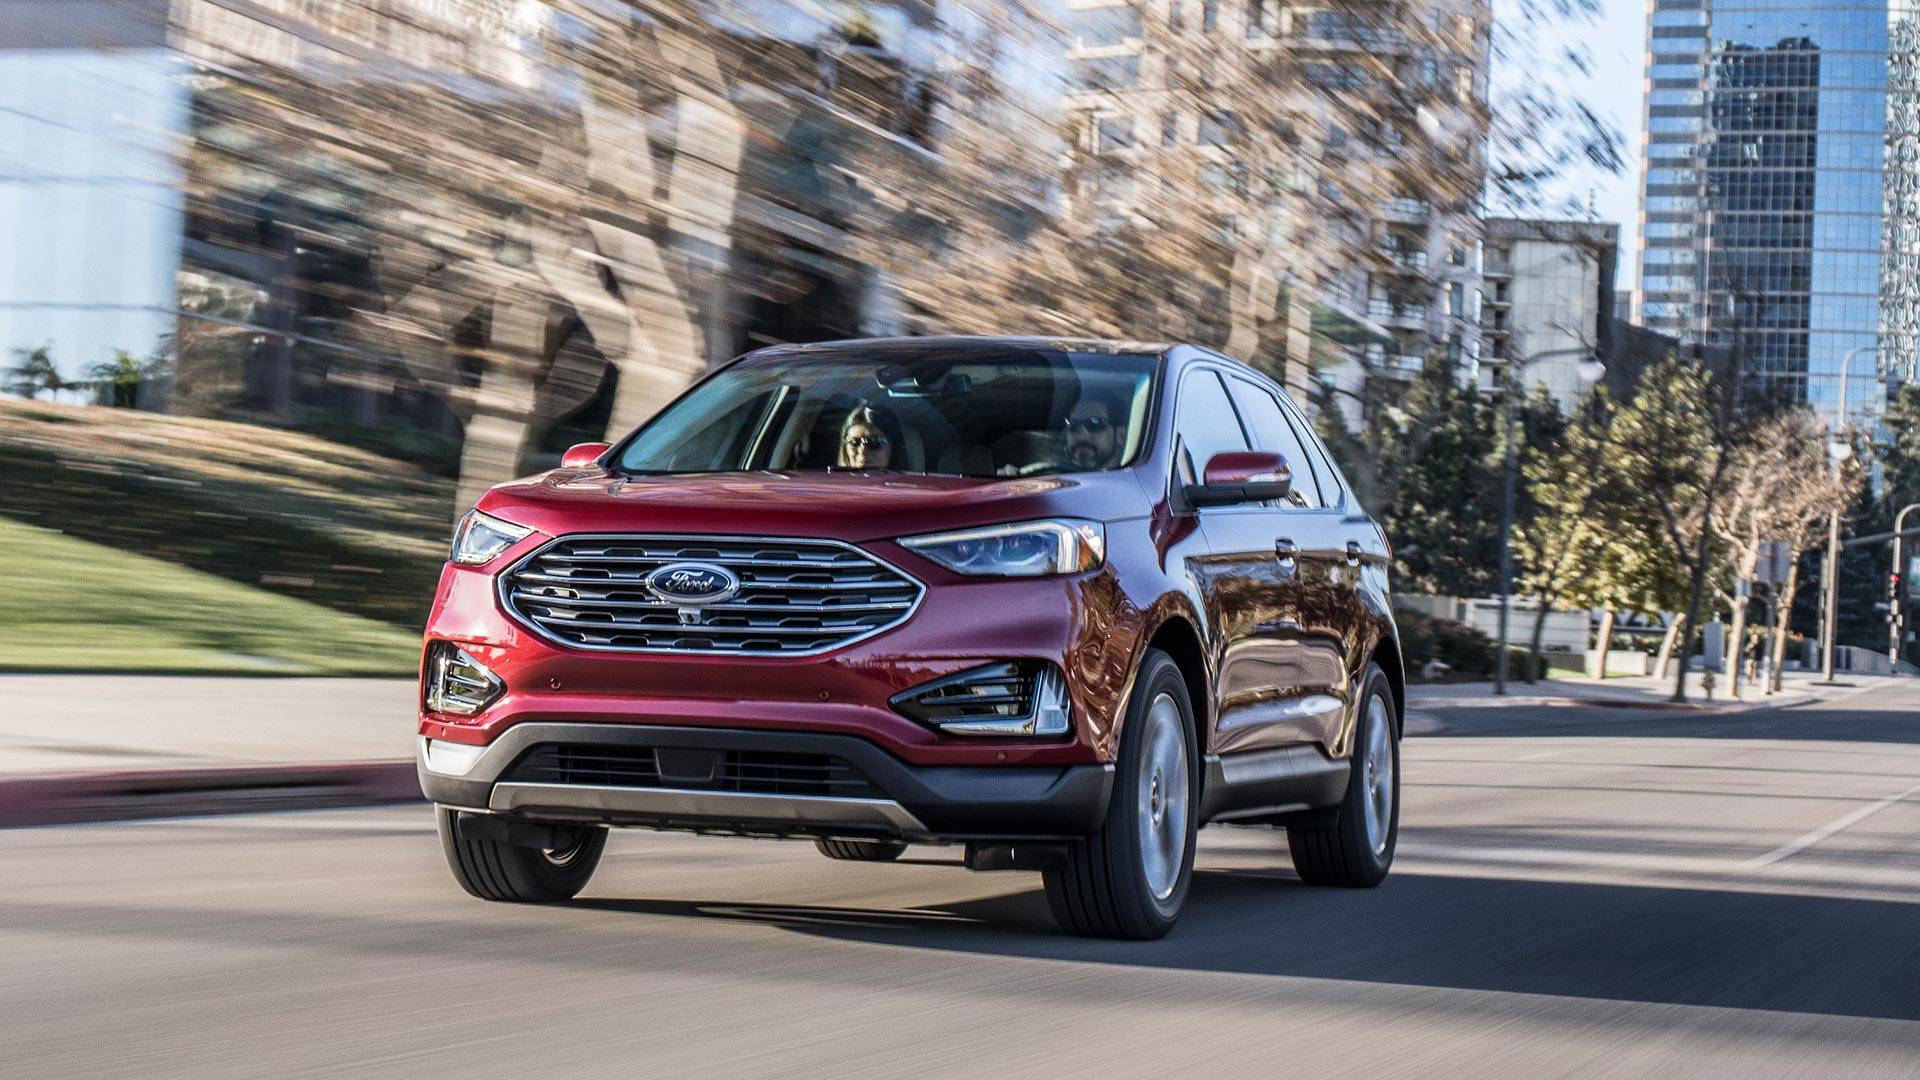 2019 Ford Edge St Debuts With 335 Hp 27 Liter Ecoboost V6